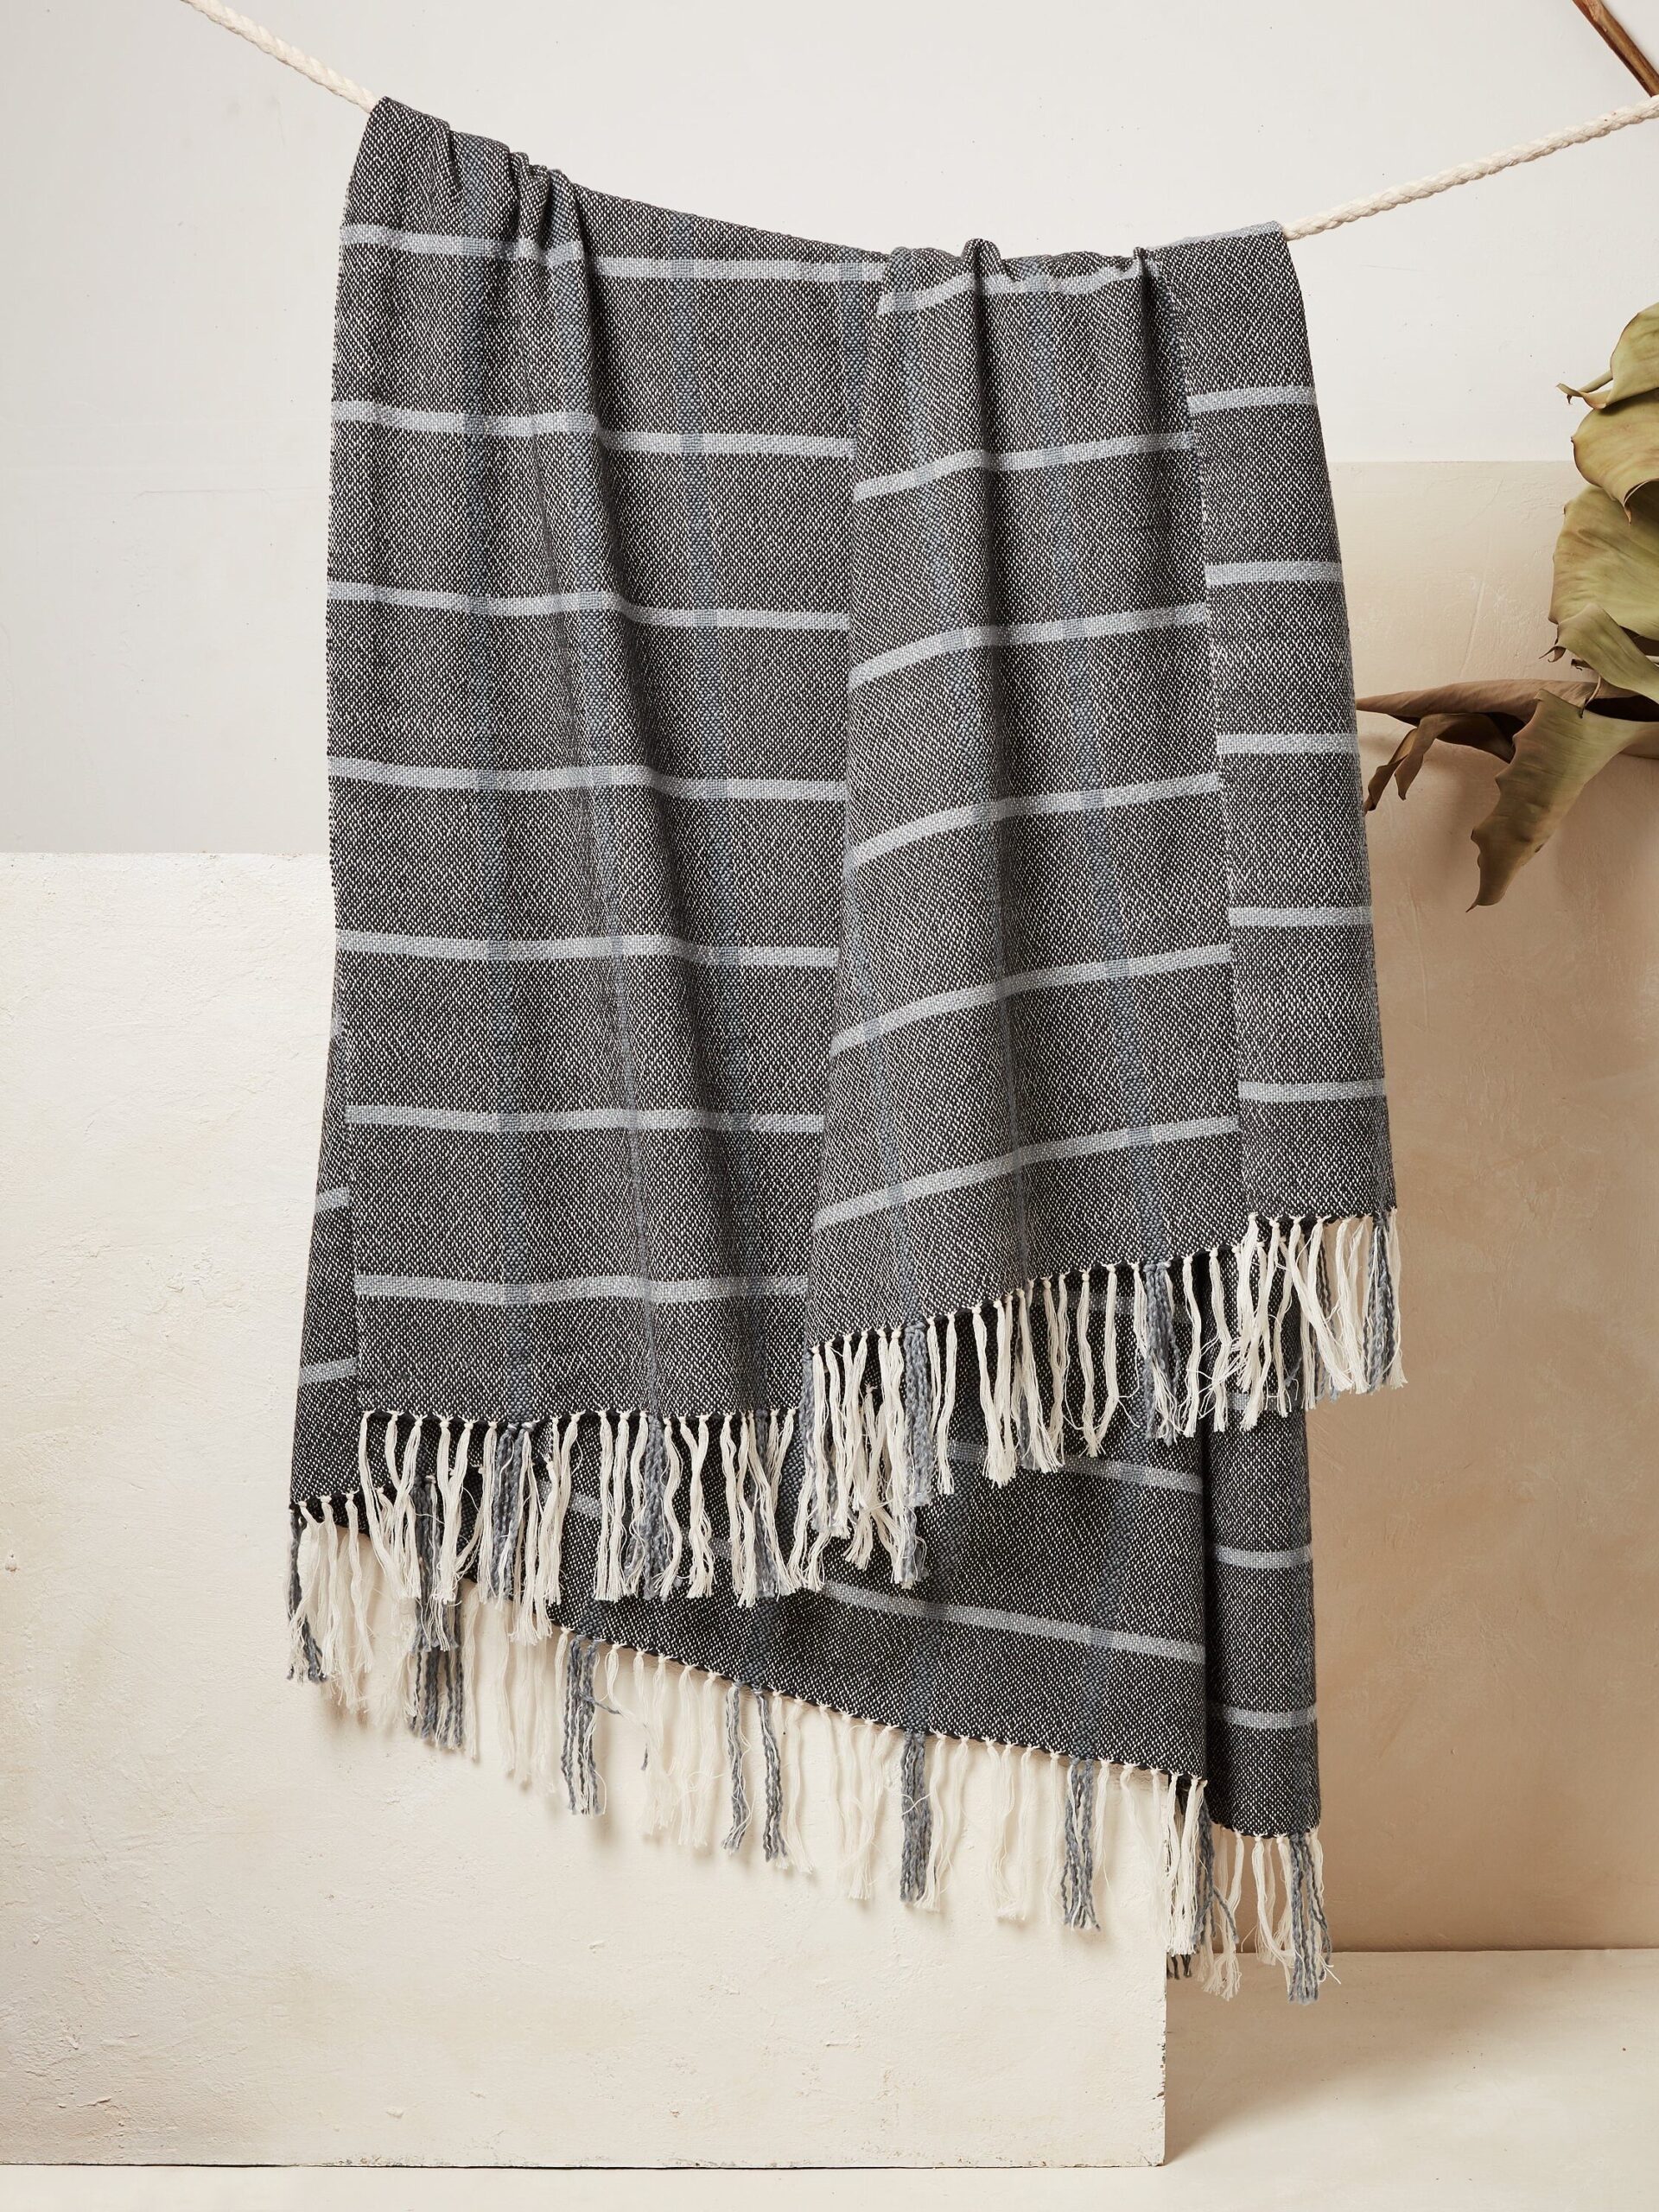 A gray blanket with white horizontal stripes and fringed ends is draped over a rope, with beige walls and a withered plant in the background.